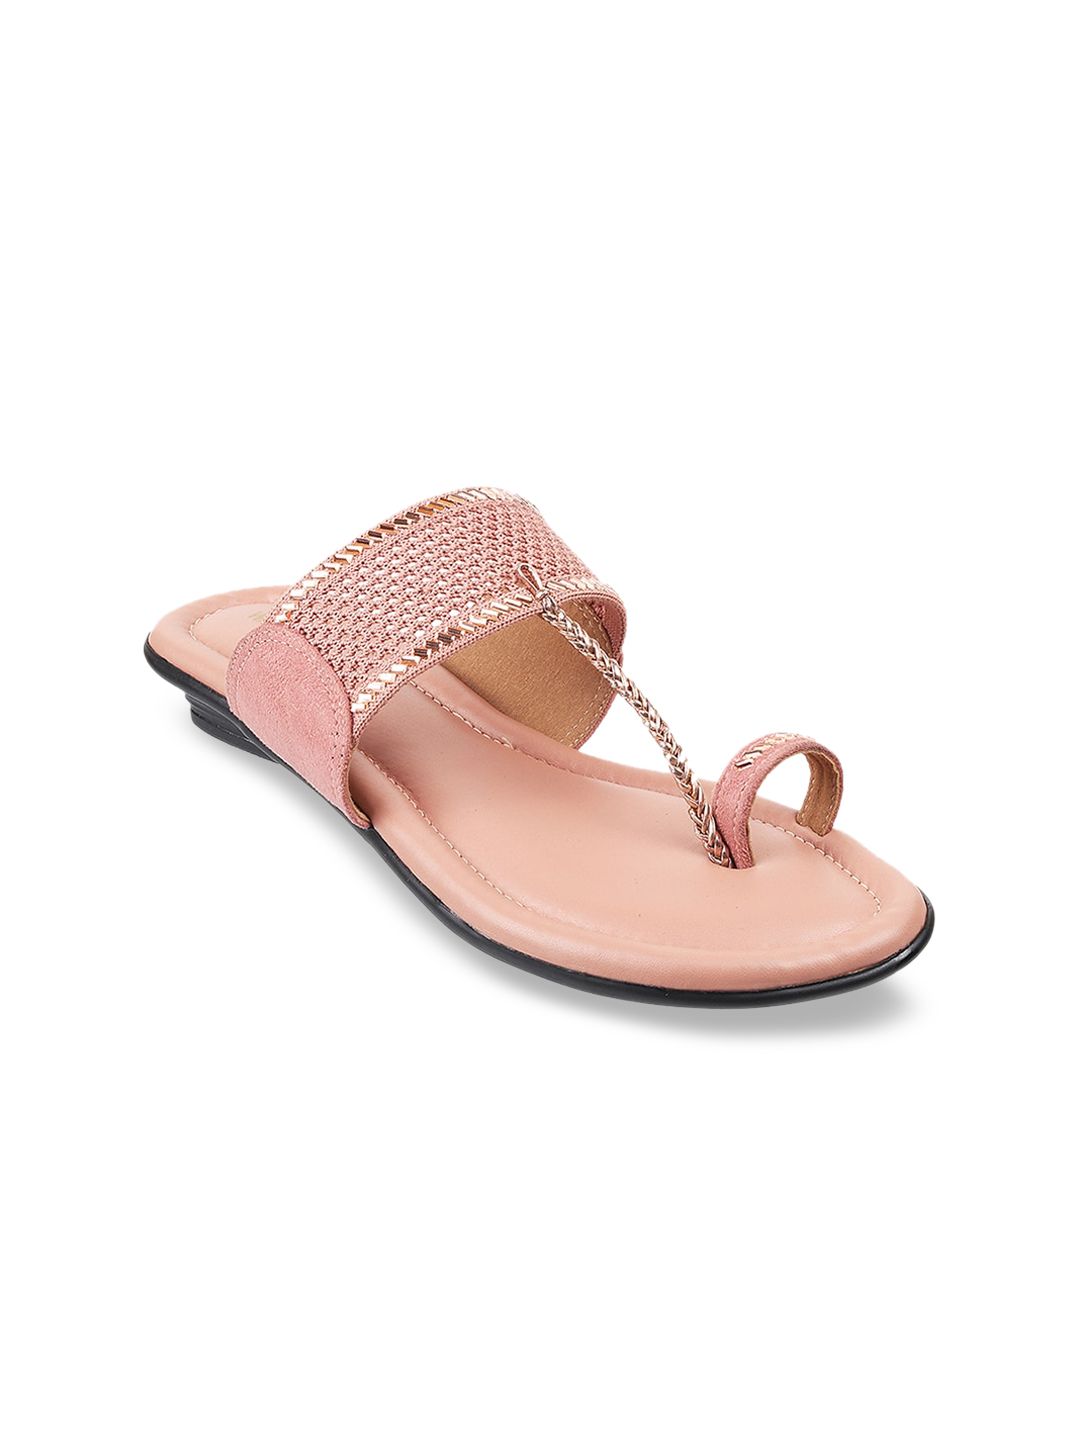 WALKWAY by Metro Women Peach-Coloured Textured One Toe Flats Price in India